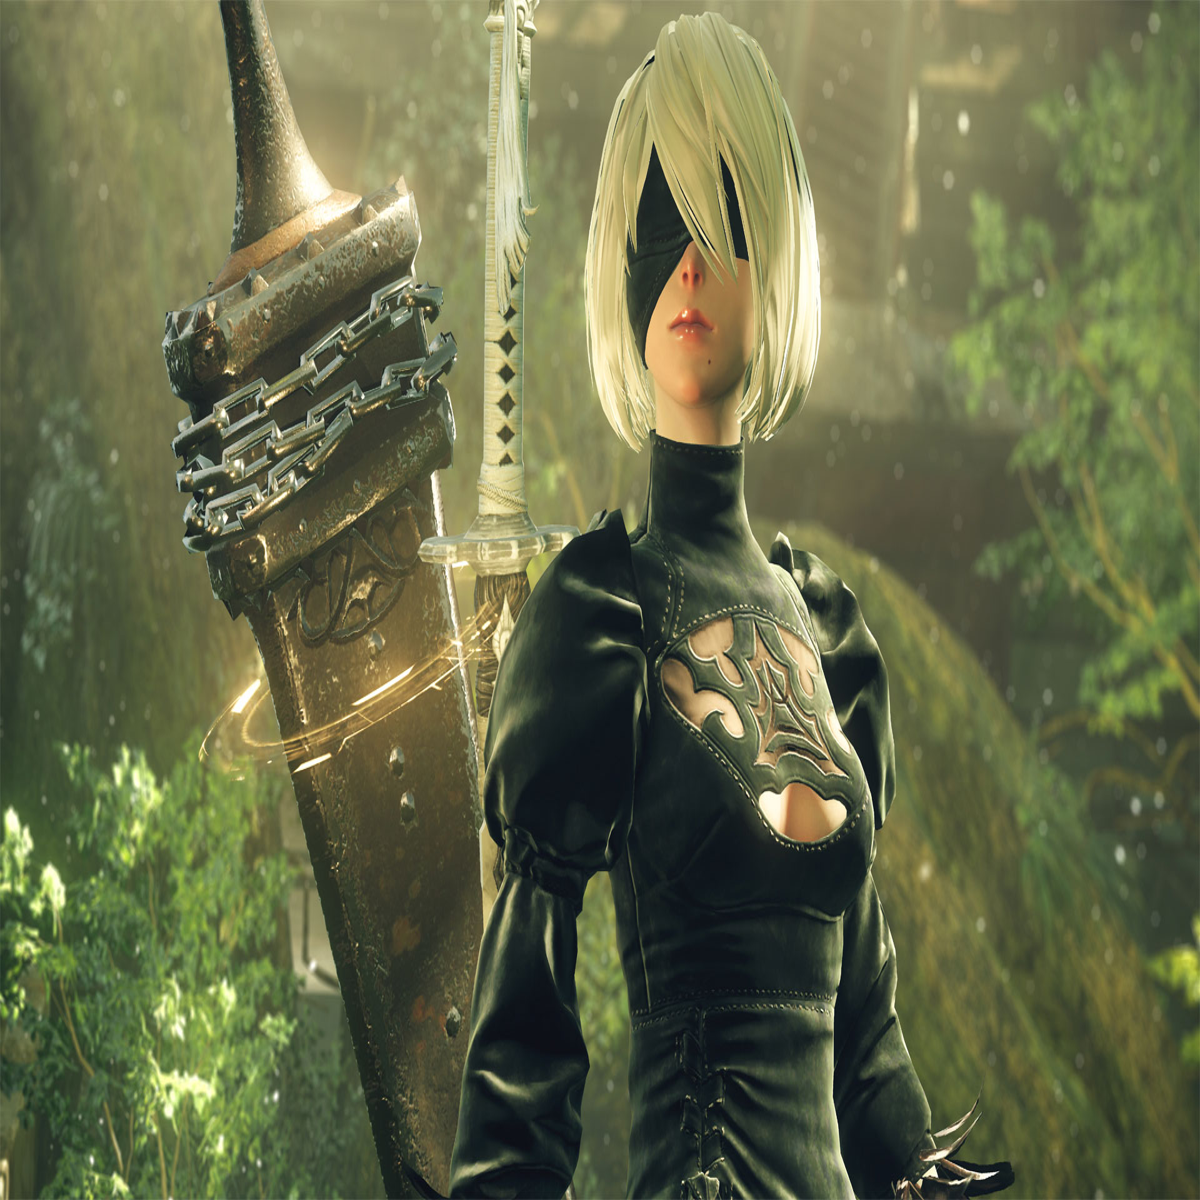 Nier Replicant Review - Carrying The Weight Of The World - GameSpot